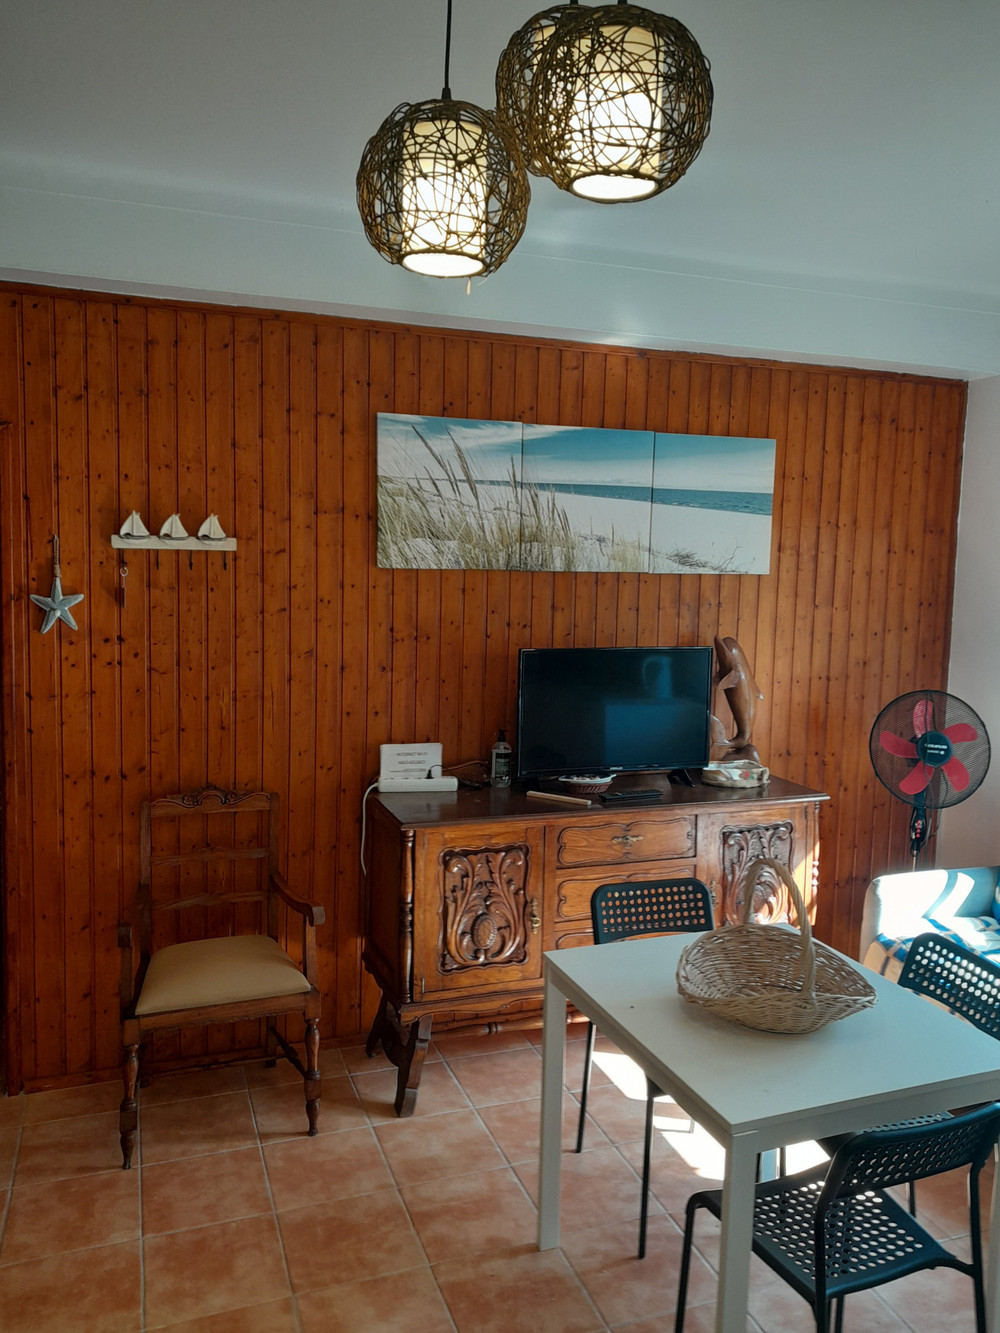 1 bedroom apartment in Odeceixe next to the river